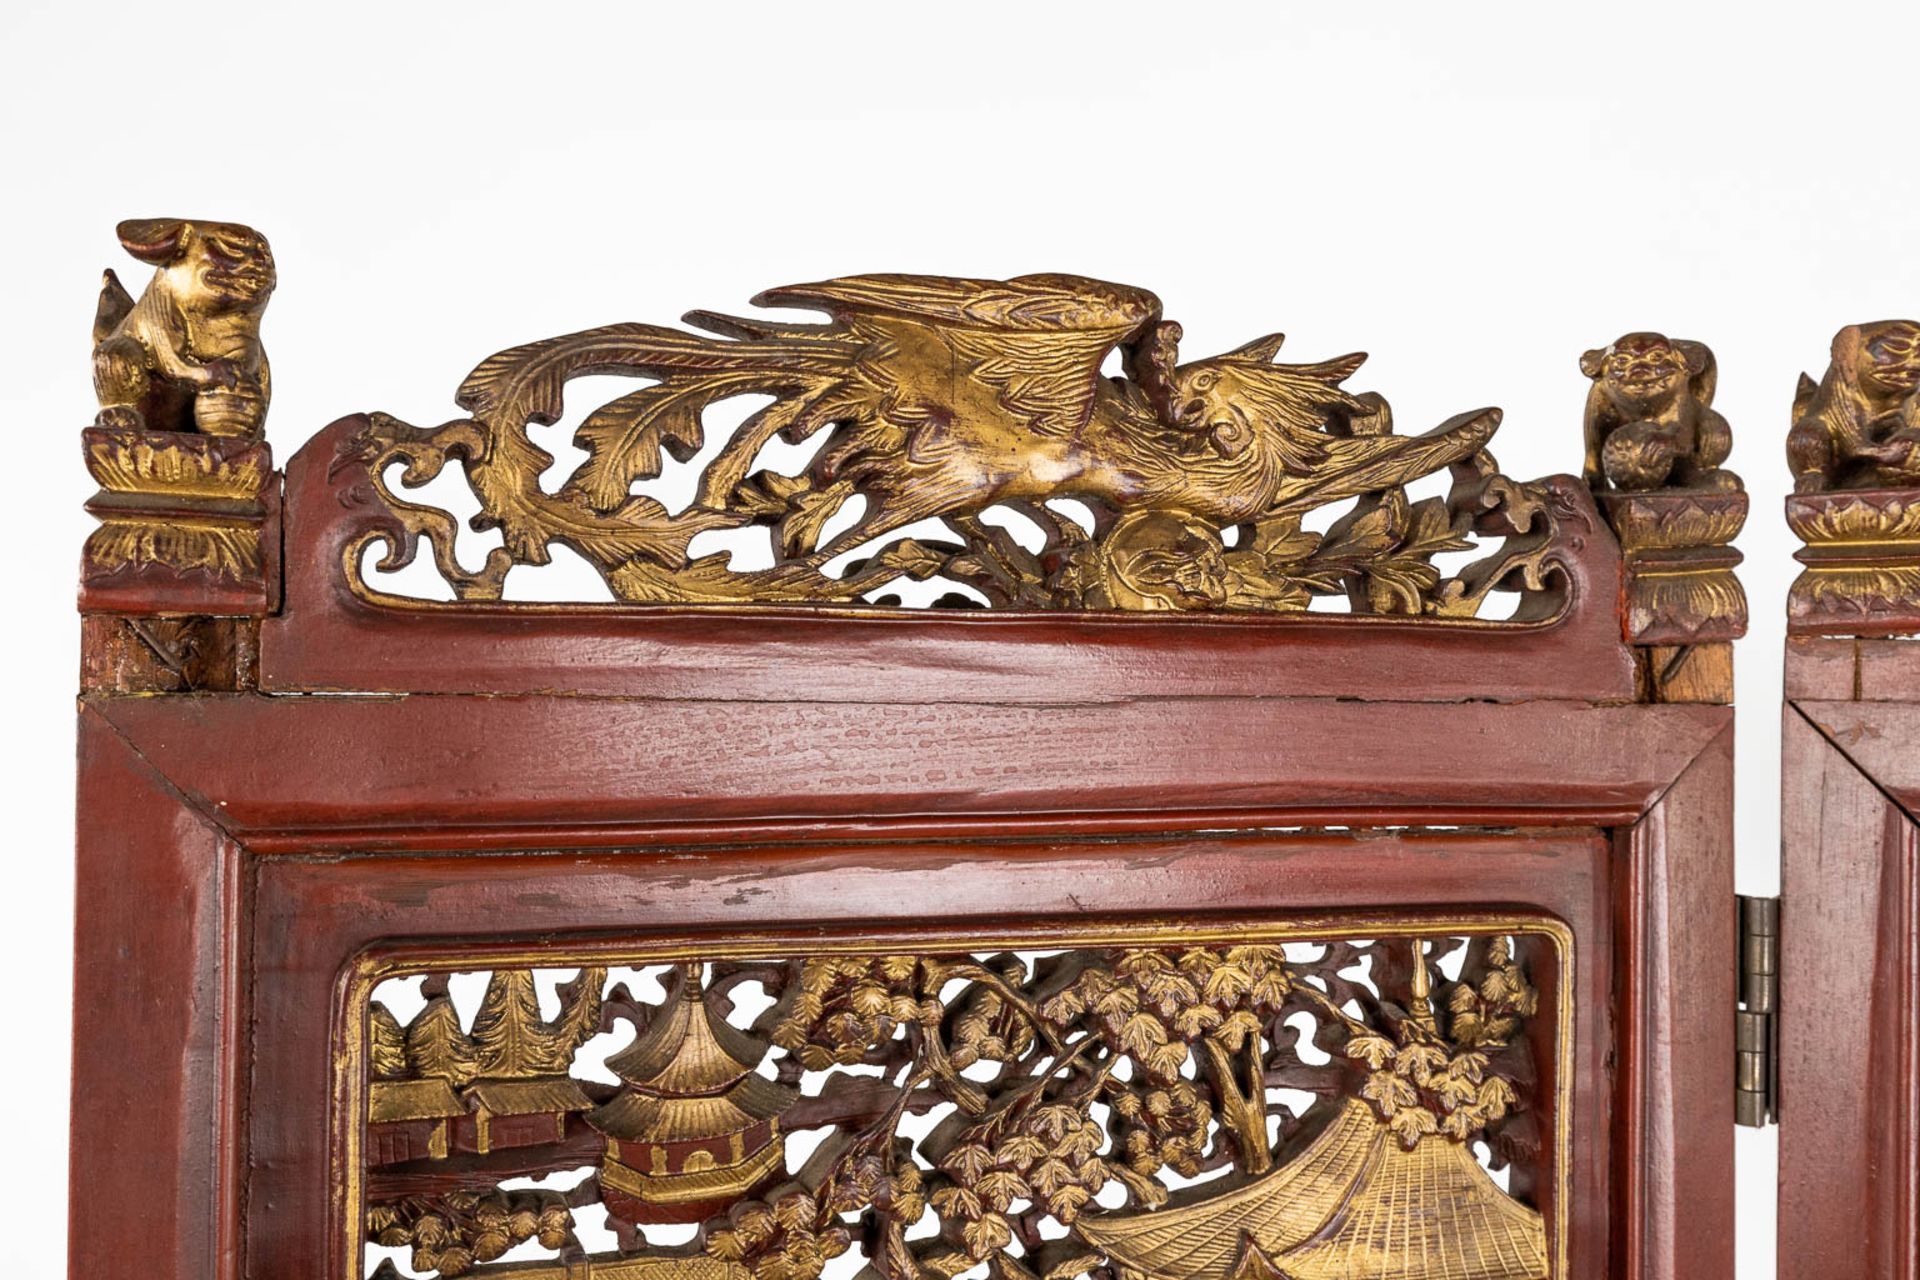 A 4-piece Chinese room divider, sculptured hardwood panels, circa 1900. (W:162 x H:185 cm) - Image 7 of 12